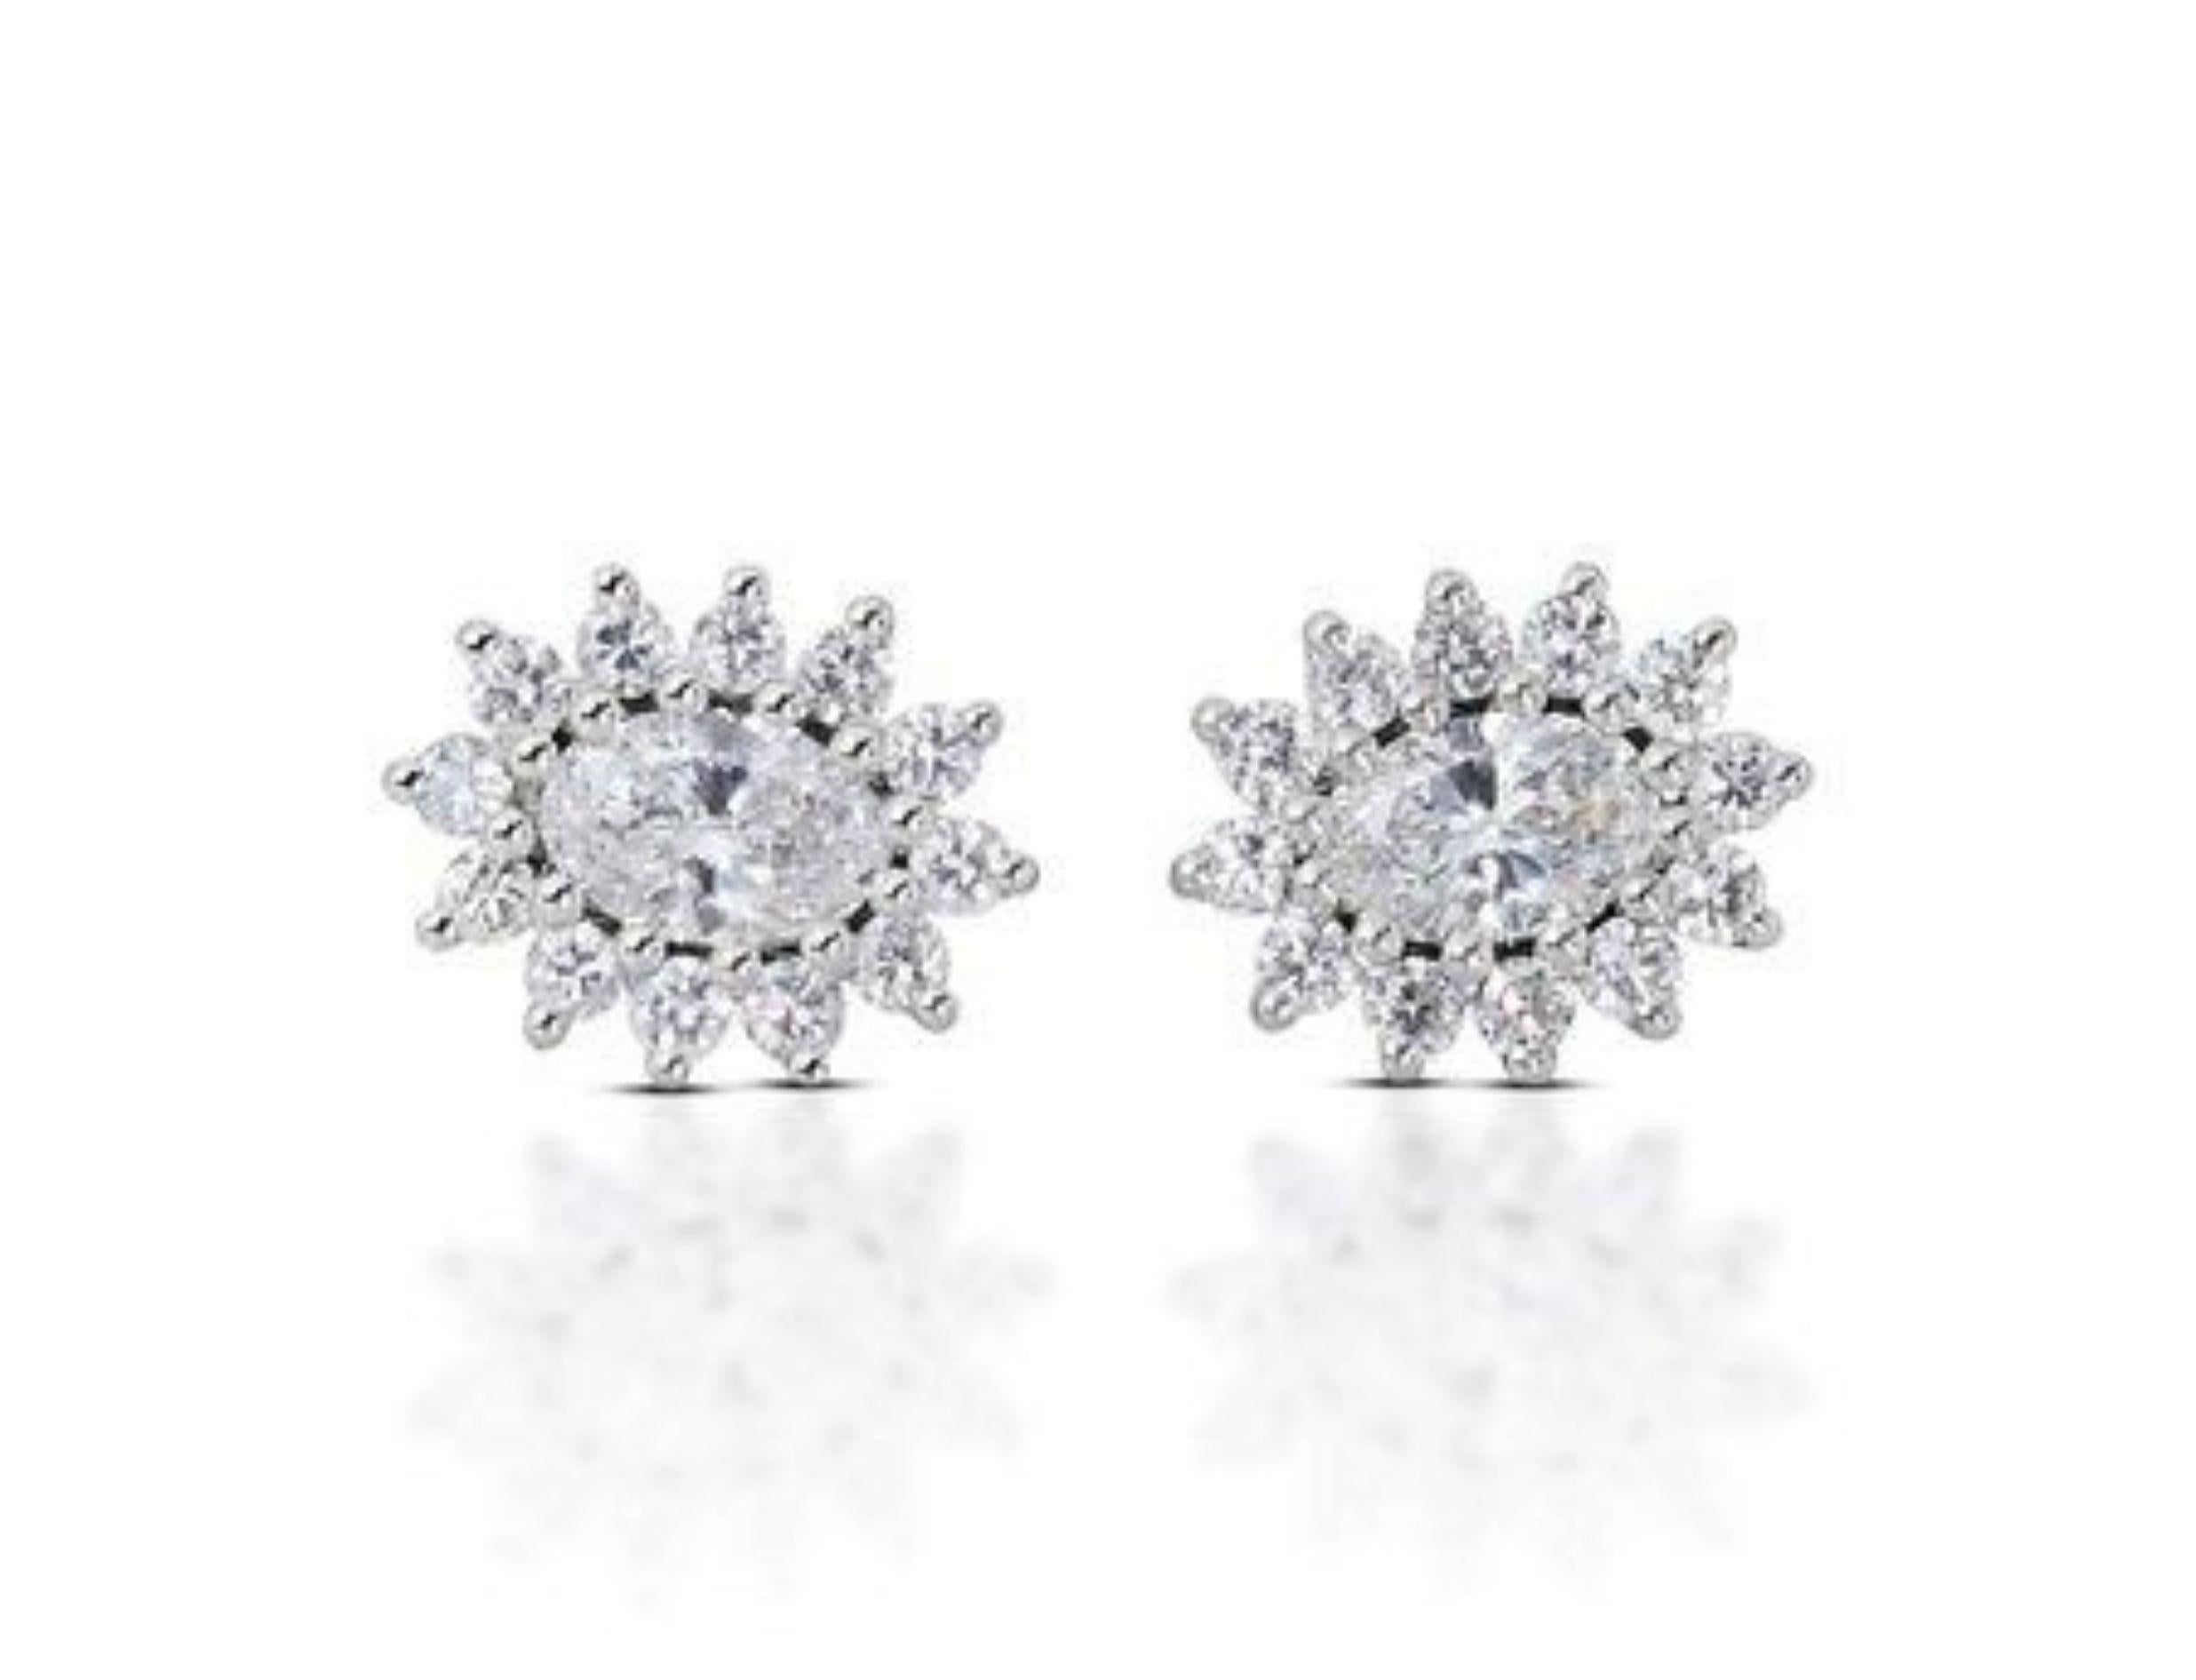 Exquisite 0.6 Carat Oval Brilliant Diamond Earrings with 0.41 Carat Side Diamonds in 14K White Gold (AIG Certified). These captivating earrings showcase two stunning 0.6 carat oval brilliant natural diamonds, certified by AIG J3312264425. The